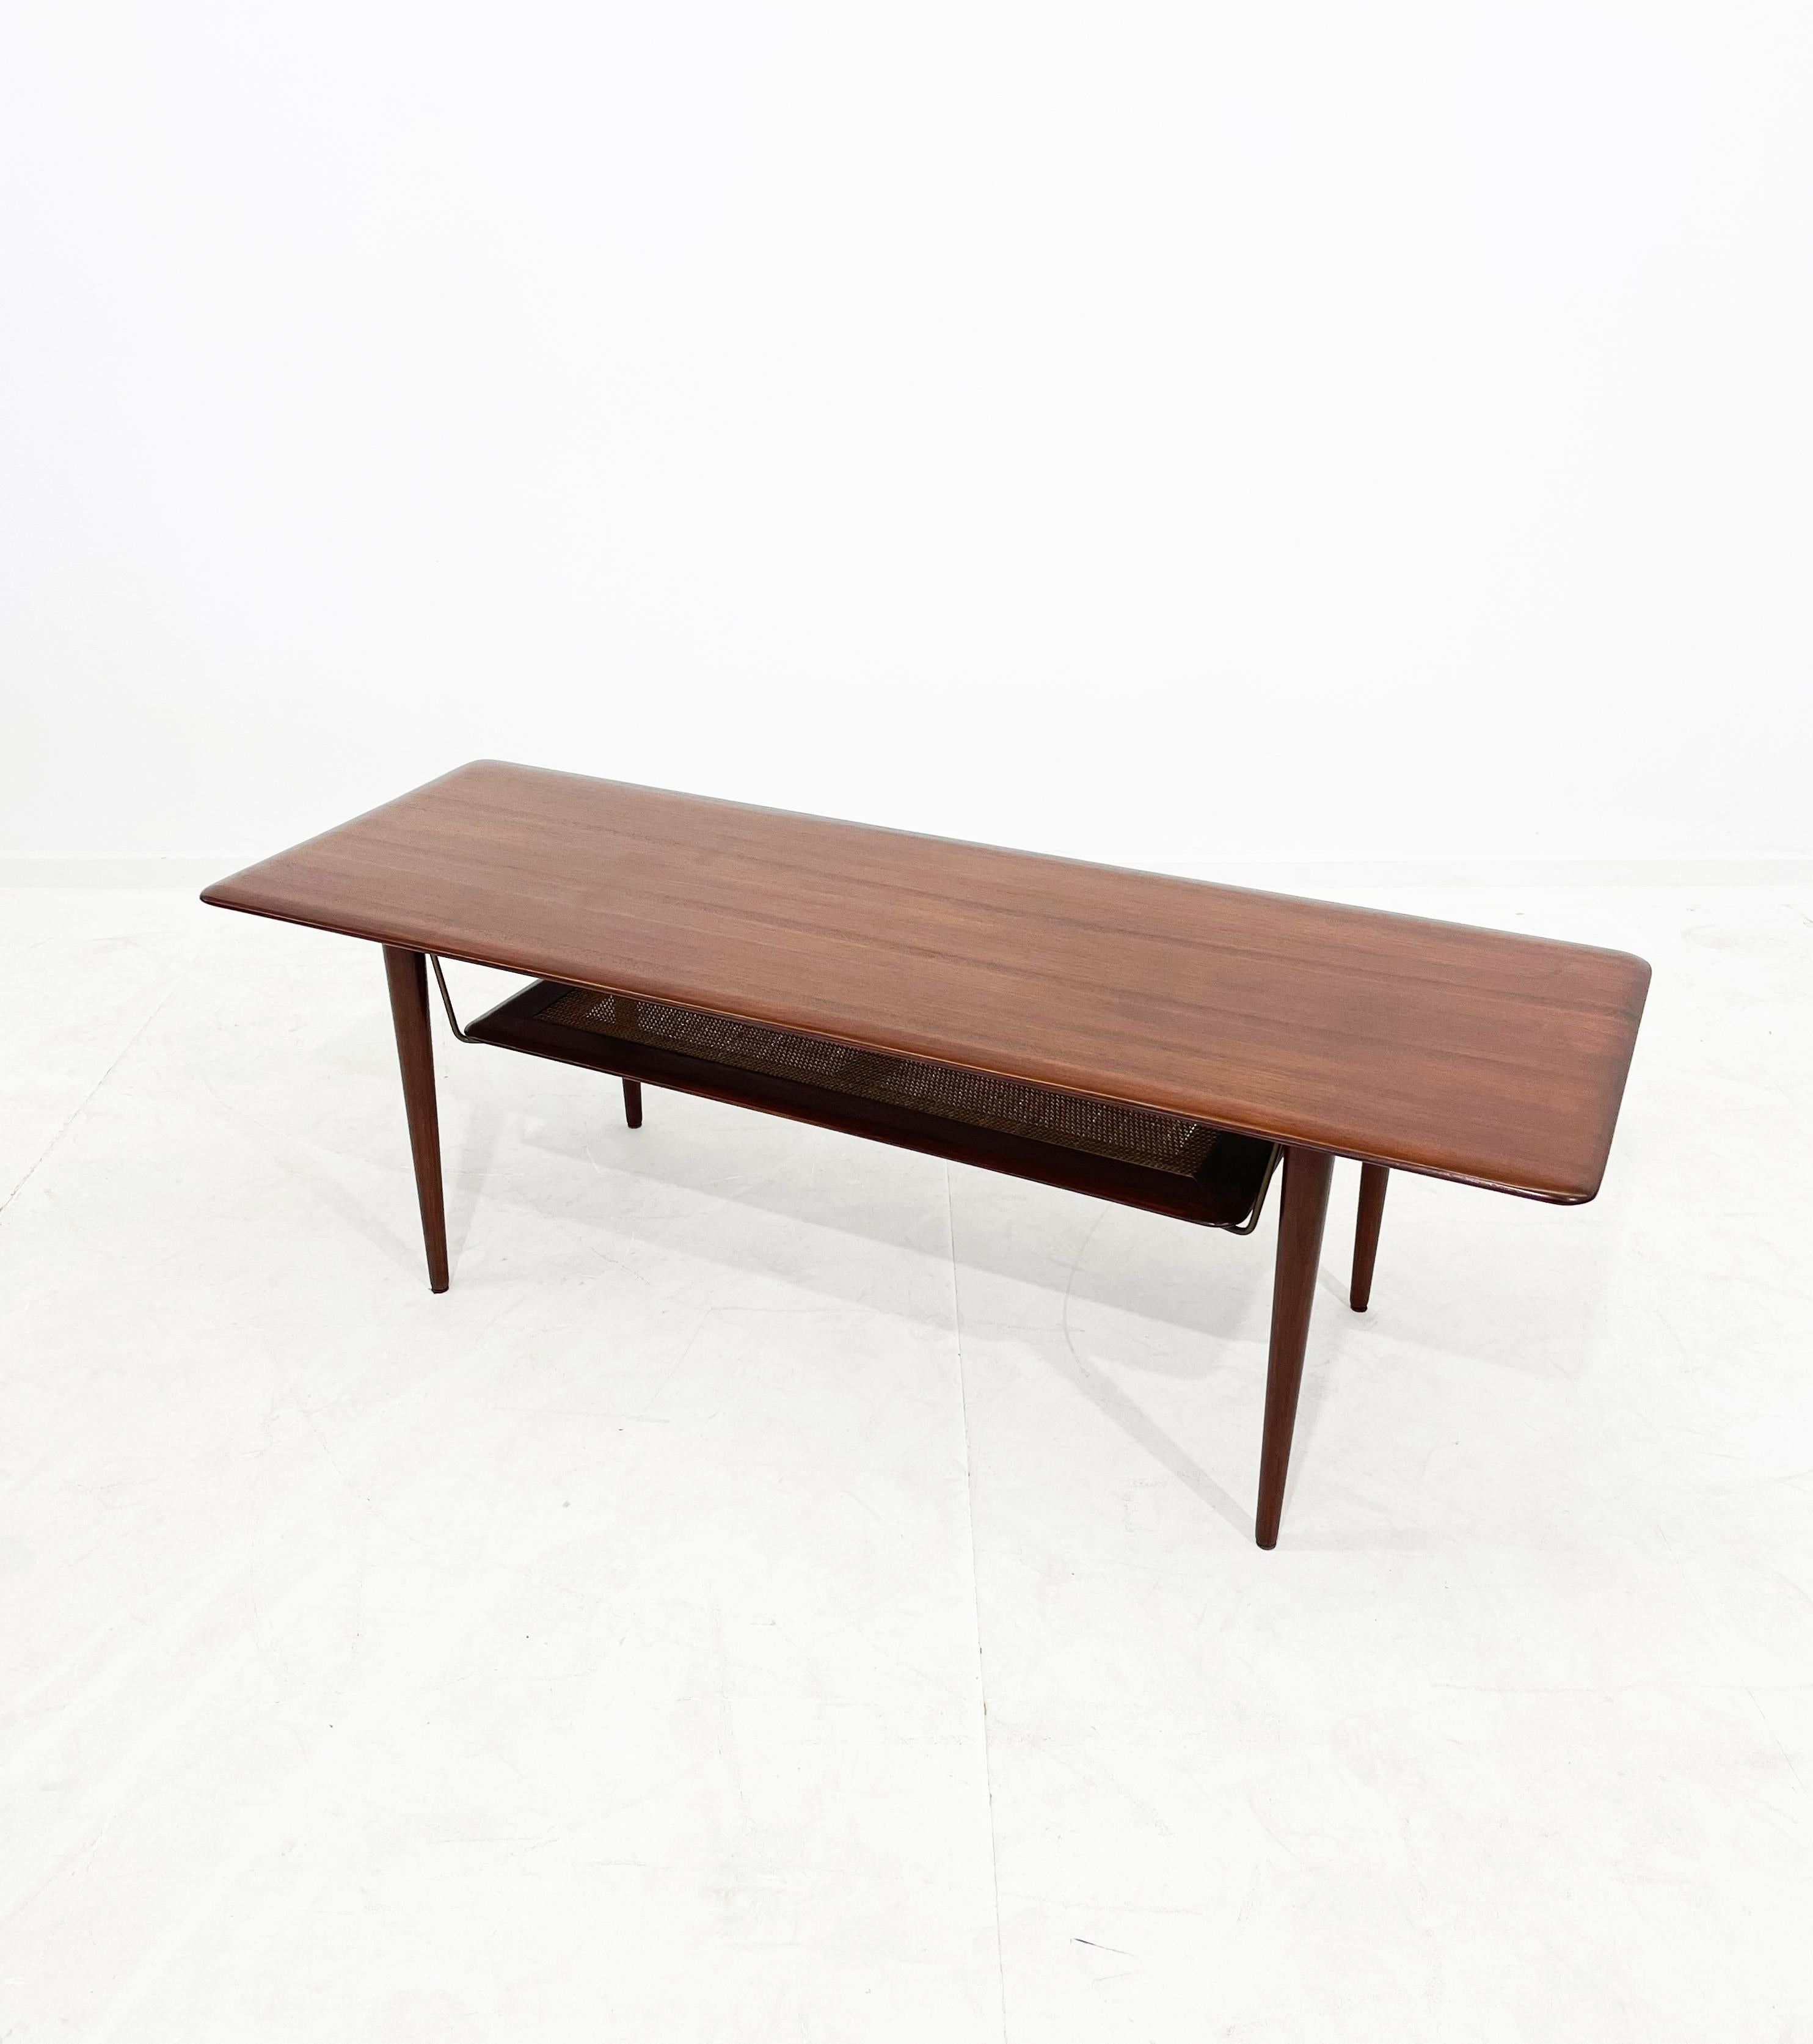 Classic coffee table from the 1960s by Peter Hvidt & Orla Mølgaard-Nielsen for France & Daverkosen. Rare model FD- 516. Frame and table top made of solid teak with an additional shelf made of rattan wicker supported by brass fittings.

The table is